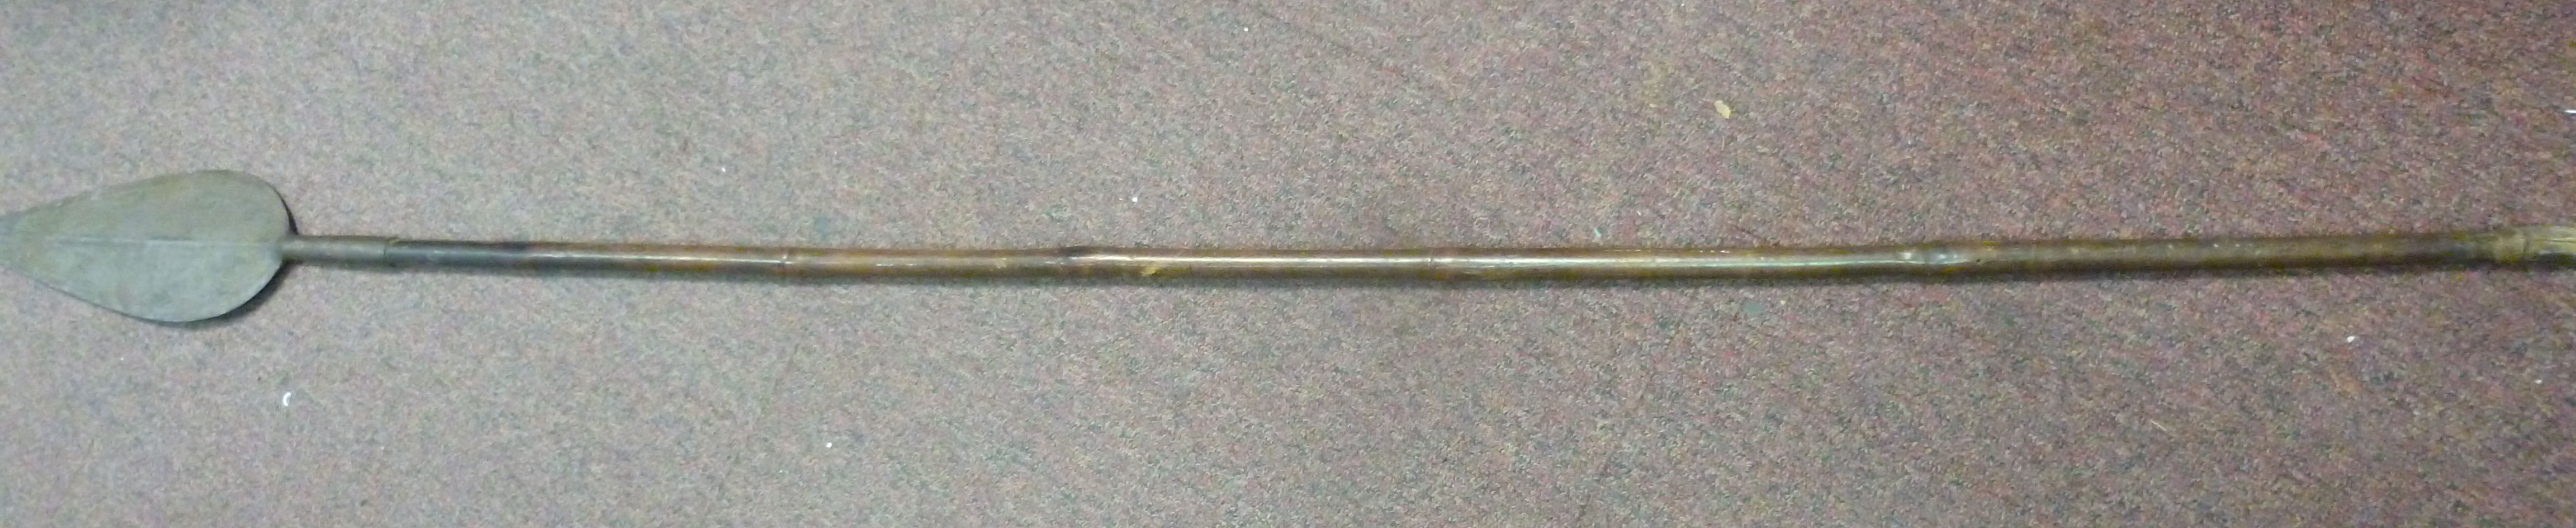 A native spear, the broad flattened stee